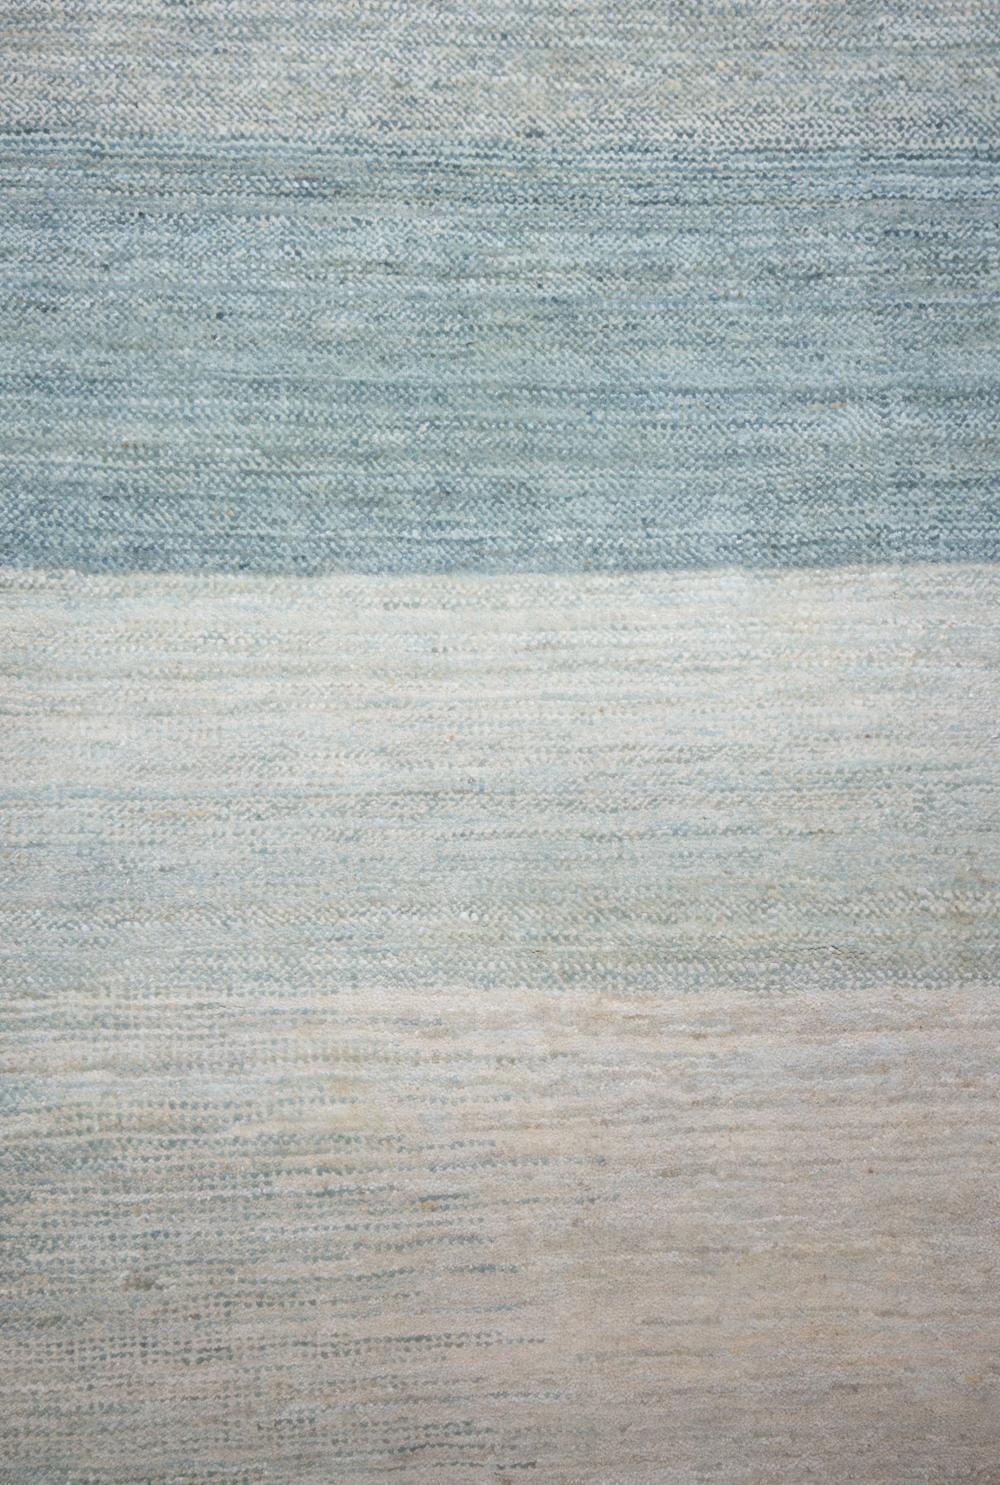 Large Blue and Jade Contemporary Gabbeh Style Persian Wool Rug. A composition of concentric, soft jade or seaglass greens, this gentle giant of a rug would be perfect in a bedroom or living room. The pale palette is similar to the backcountry waters